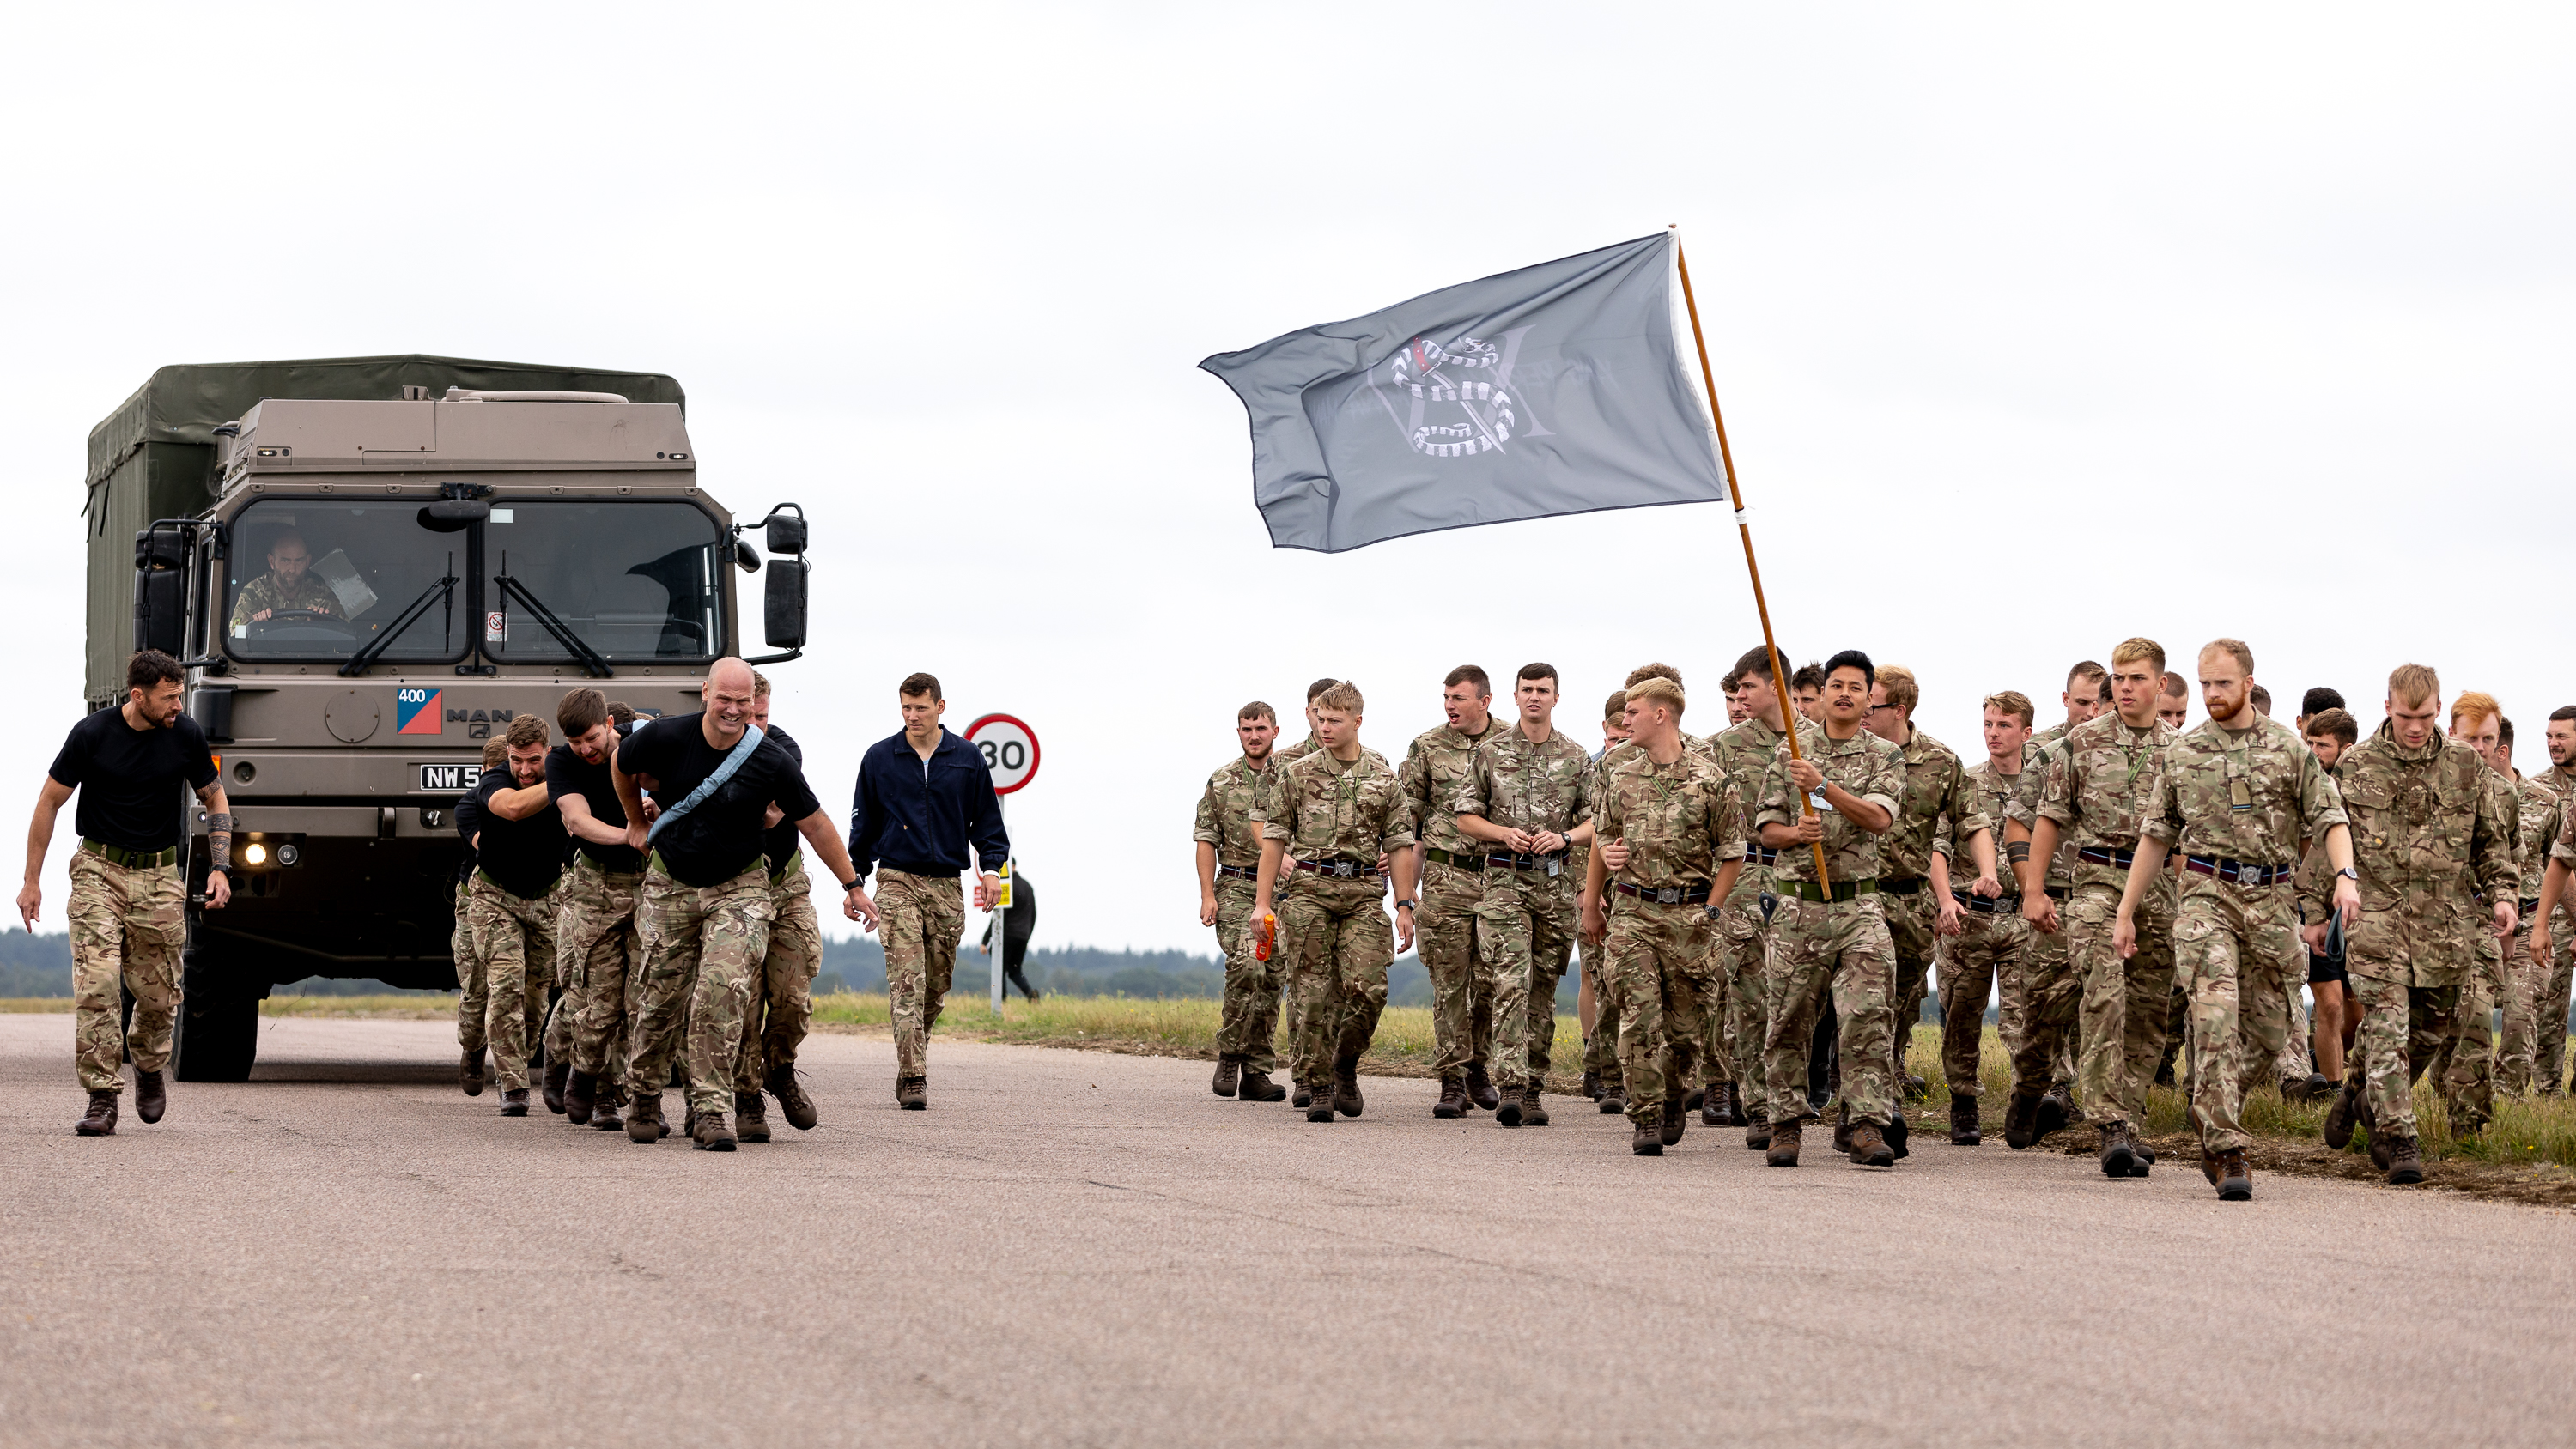 Personnel with 15 Squadron RAF Regiment flag walk alongside personnel pulling a vehicle.